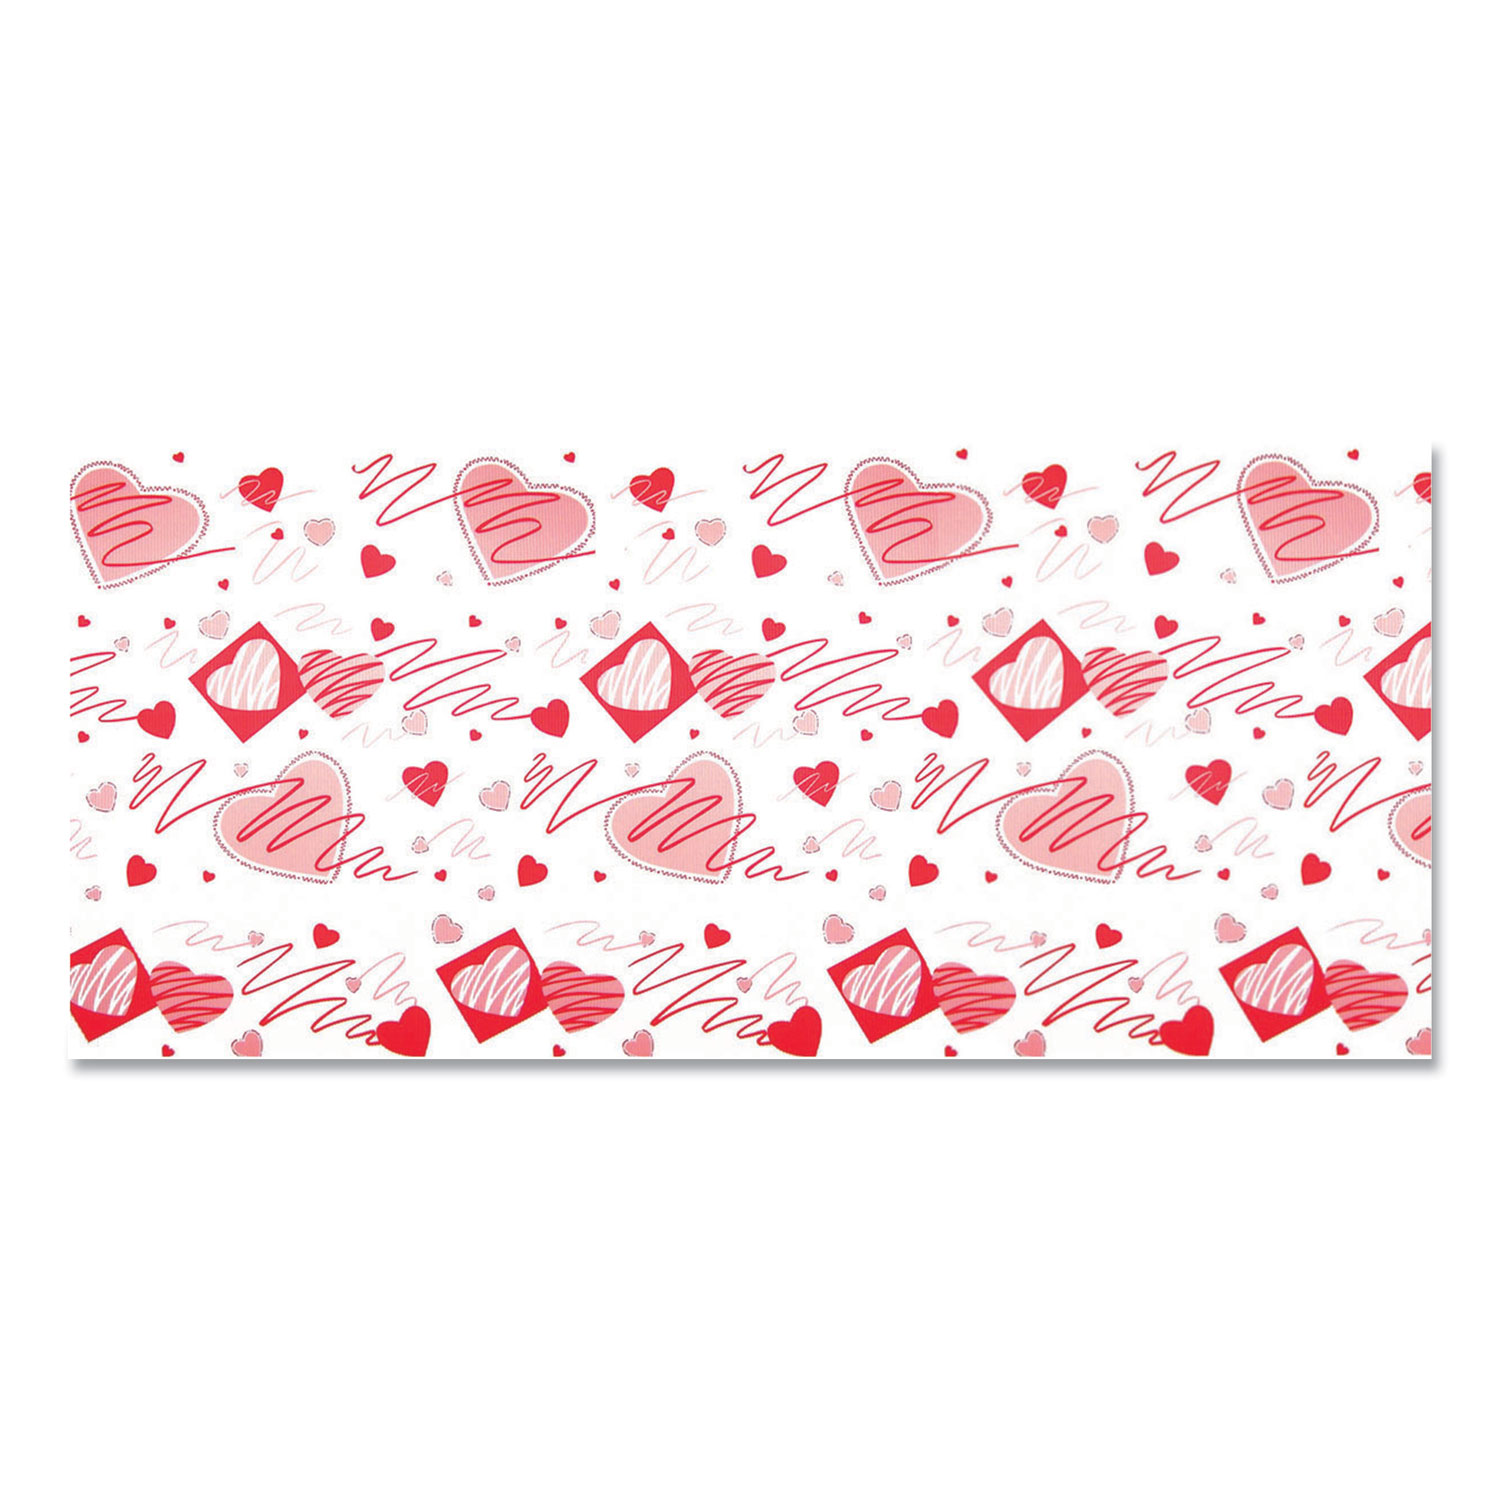  Pacon 0012251 Corobuff Corrugated Paper Roll, 48 x 25 ft, Valentine Hearts (PAC24392402) 